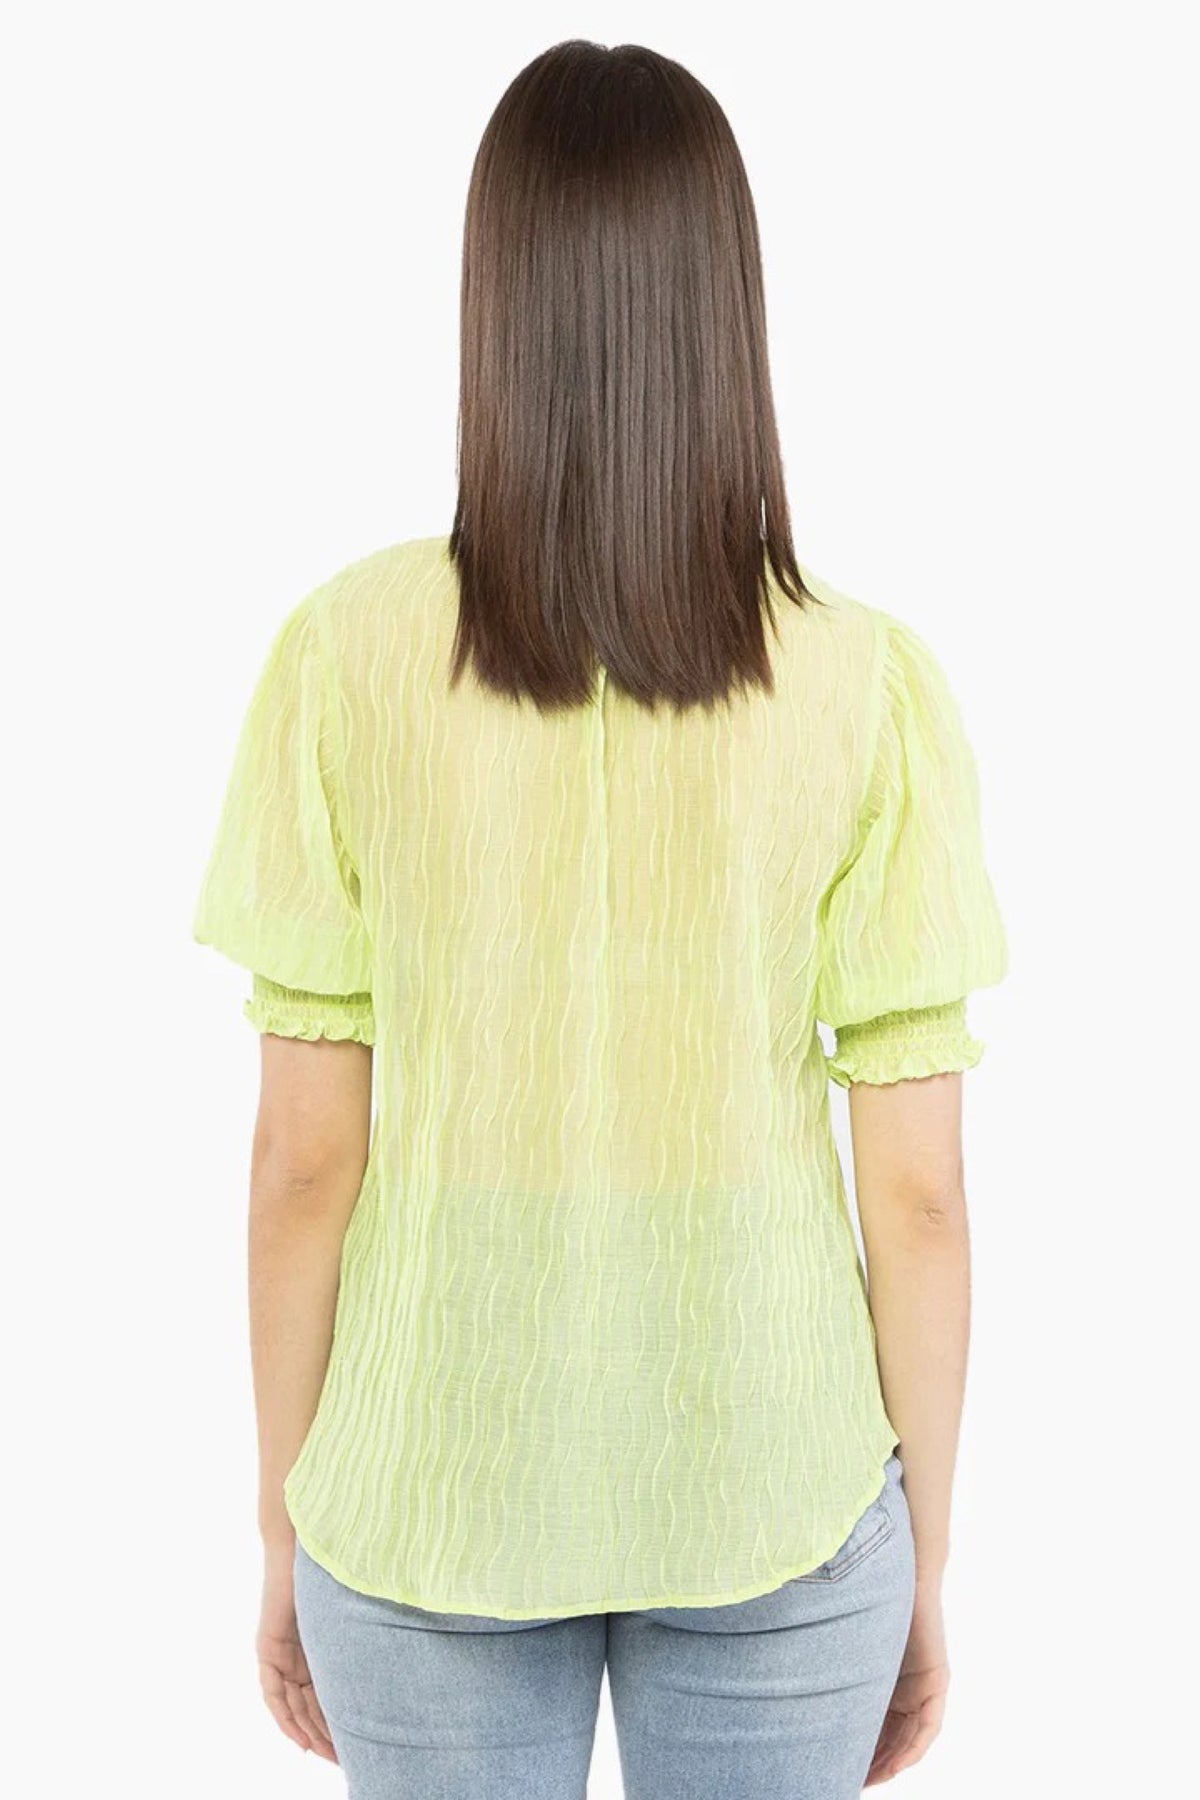 Brixton Top Lime